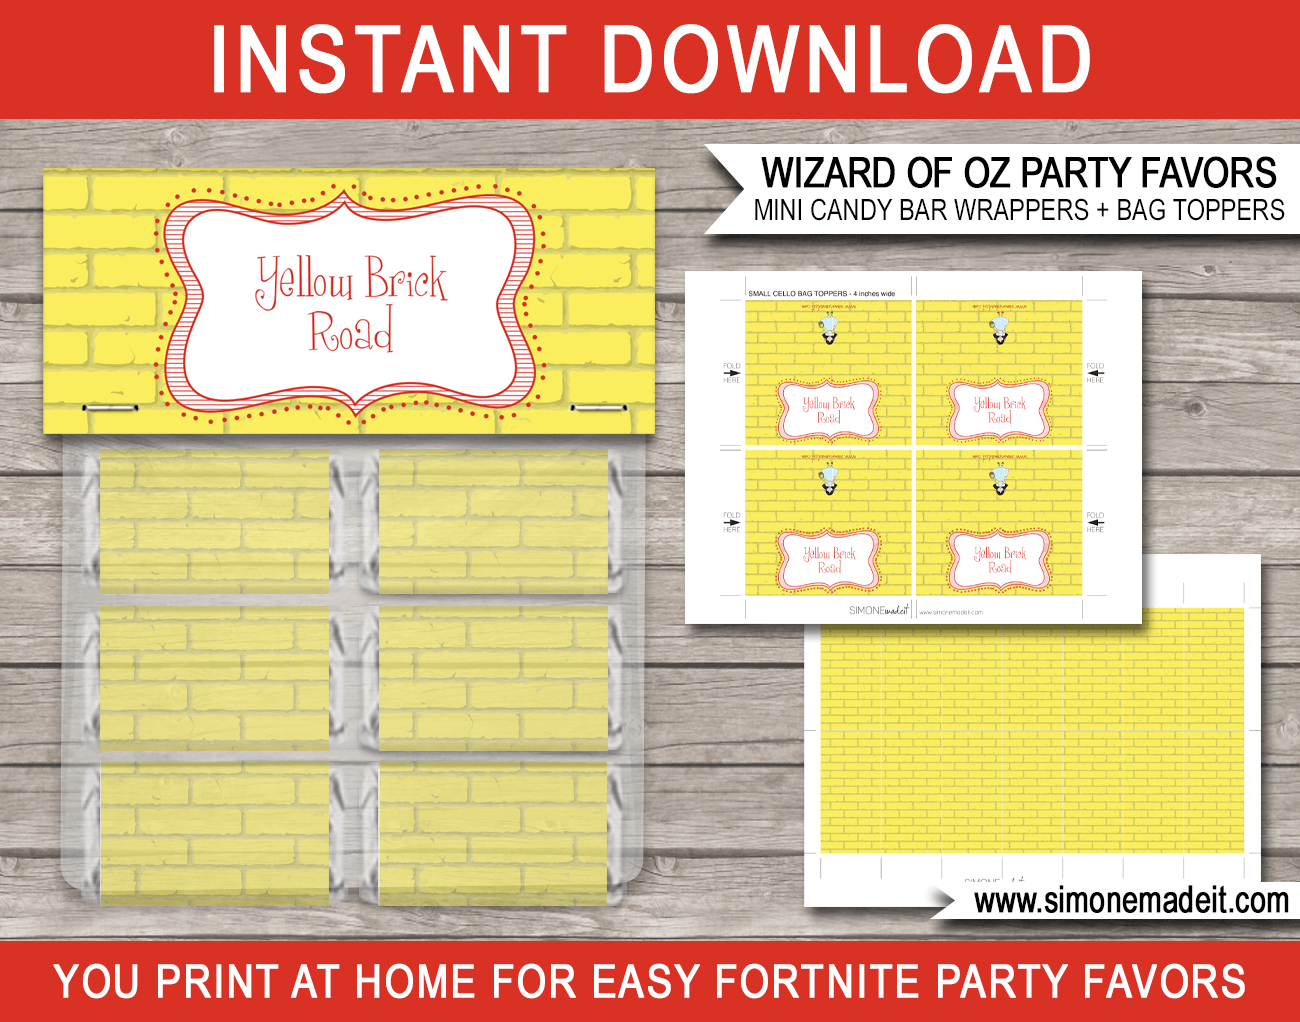 Wizard of Oz Yellow Brick Road Printable Party Favors | Wizard of Oz Favor Bag Toppers & Yellow Brick Road Mini Candy Bar Wrappers | Birthday Party Favors | DIY Printable Templates | INSTANT DOWNLOAD via SIMONEmadeit.com #yellowbrickroad #wizardofozparty